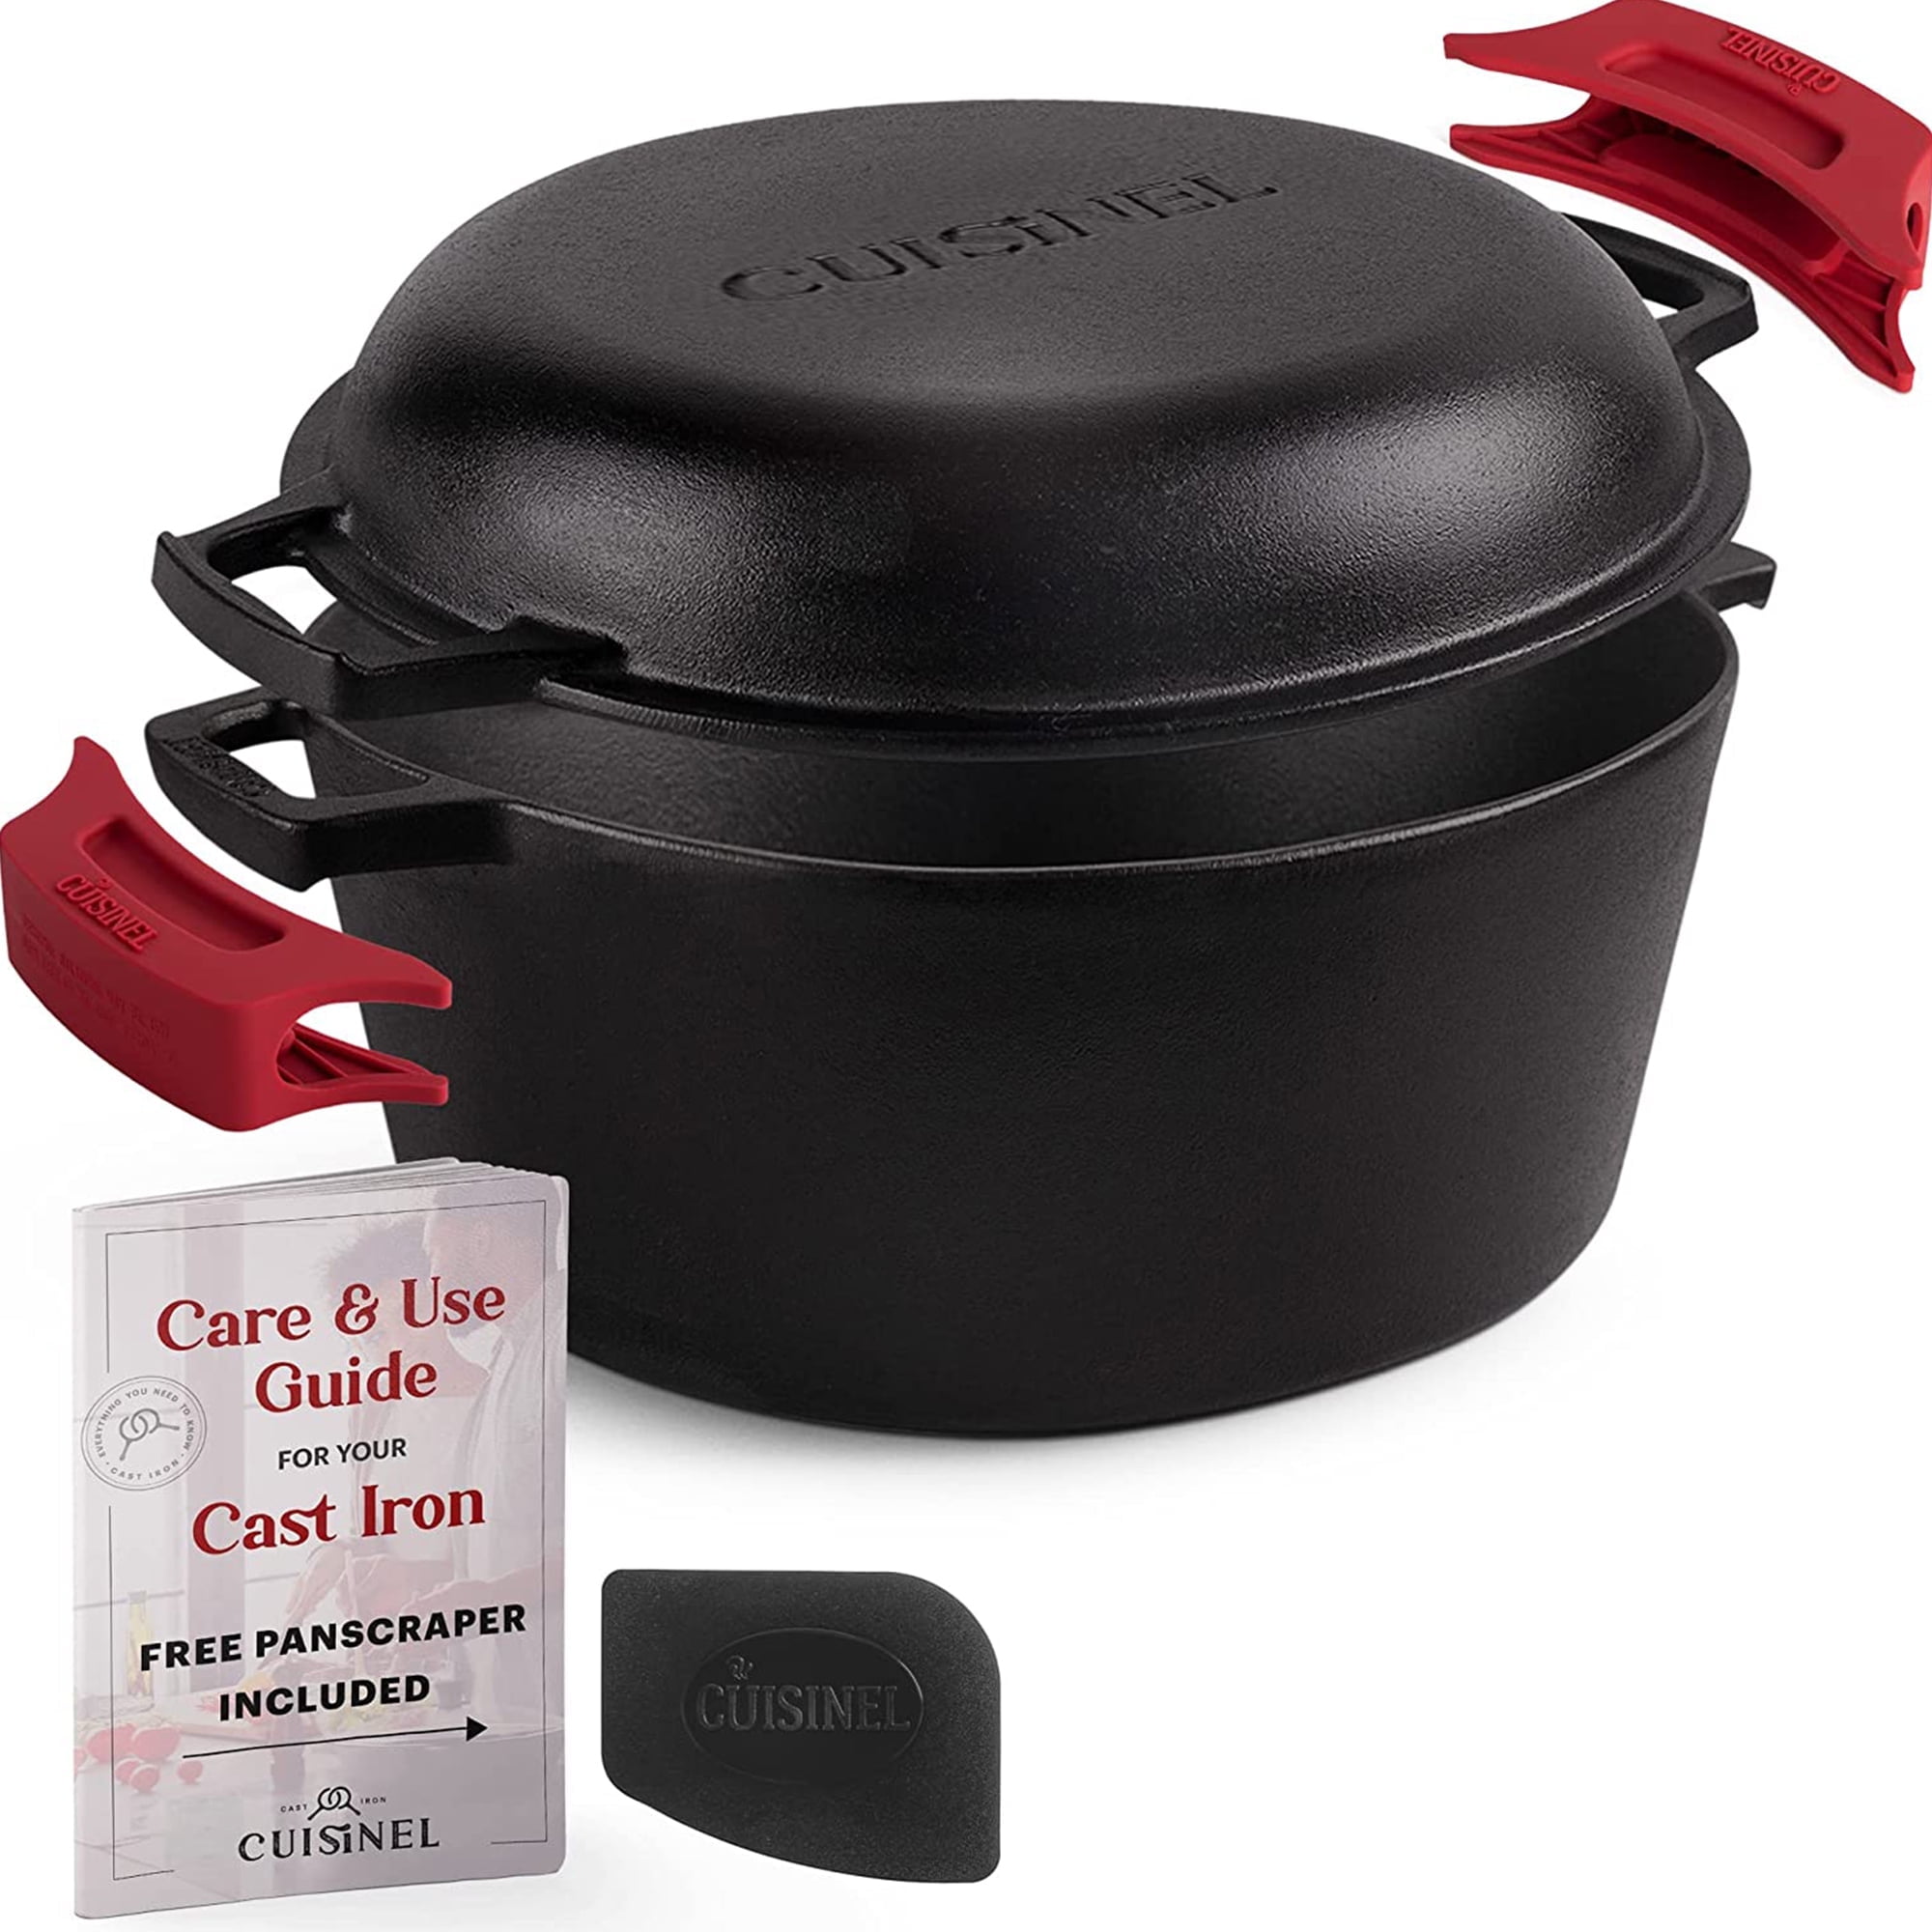 Camp Oven - Searing Heat, Seasoned Perfection (4.5QT) - Grab Yours